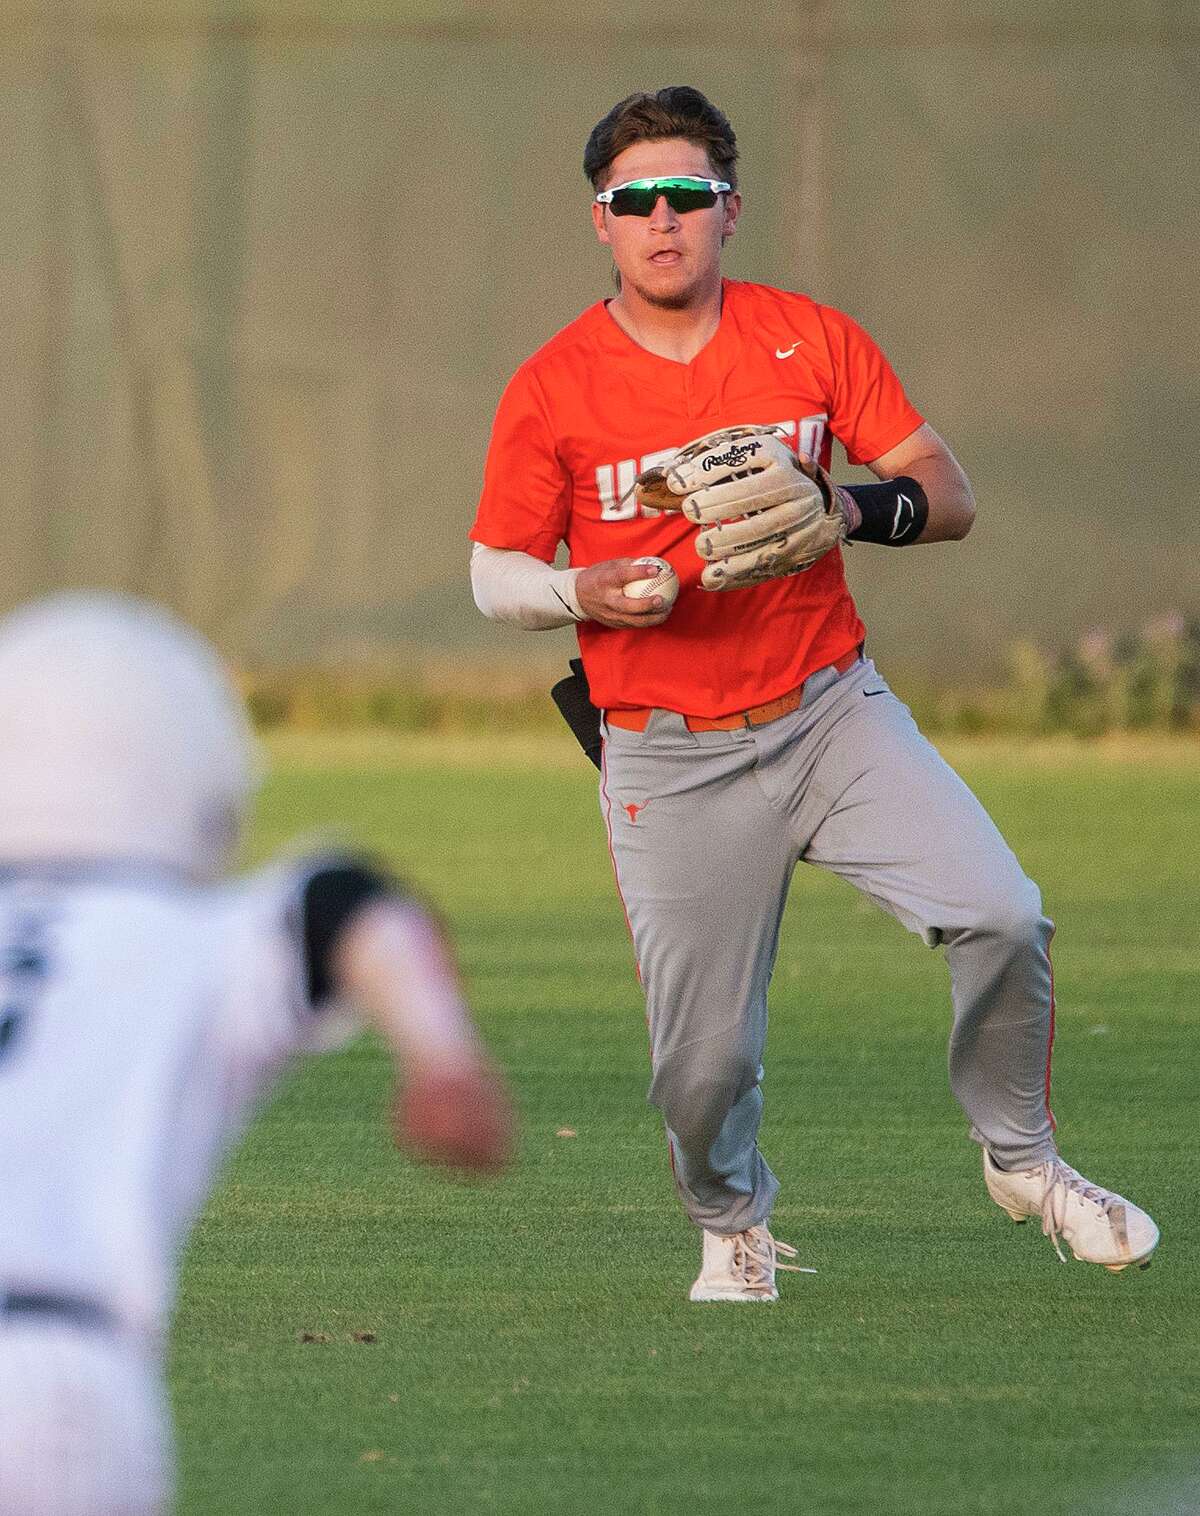 United High School’s Josh Linn looks to make a play during a game against United South High School, Friday, April 8, 2022 at the UISD Student Activity Complex.